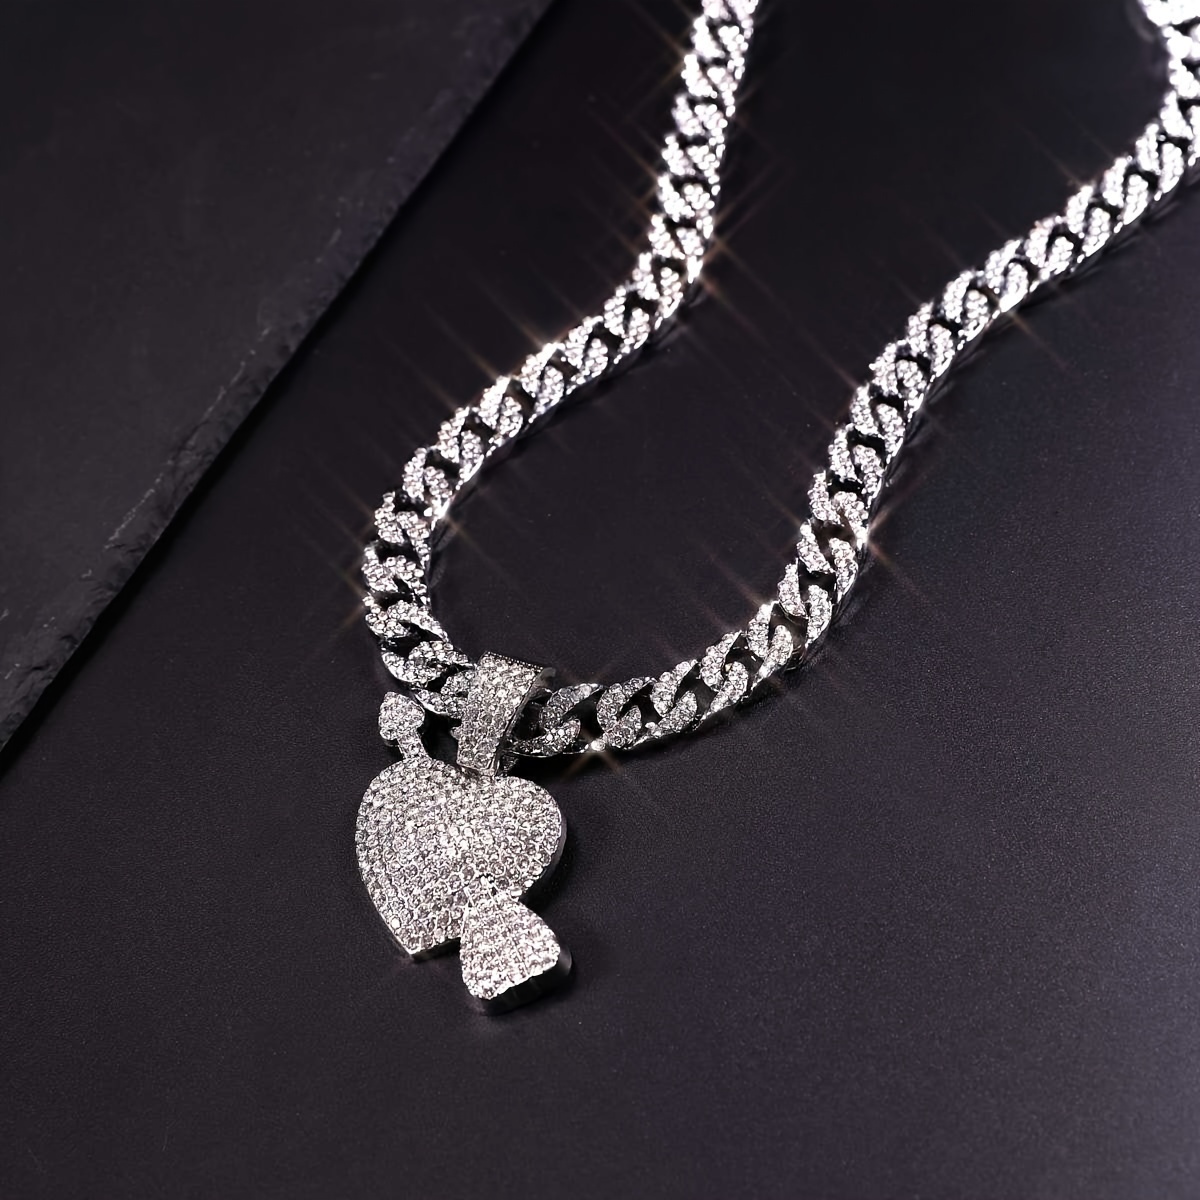 1Pc Rhinestone Link Chain Necklace Silver Color Pendant Women Girl Jewelry  Gifts